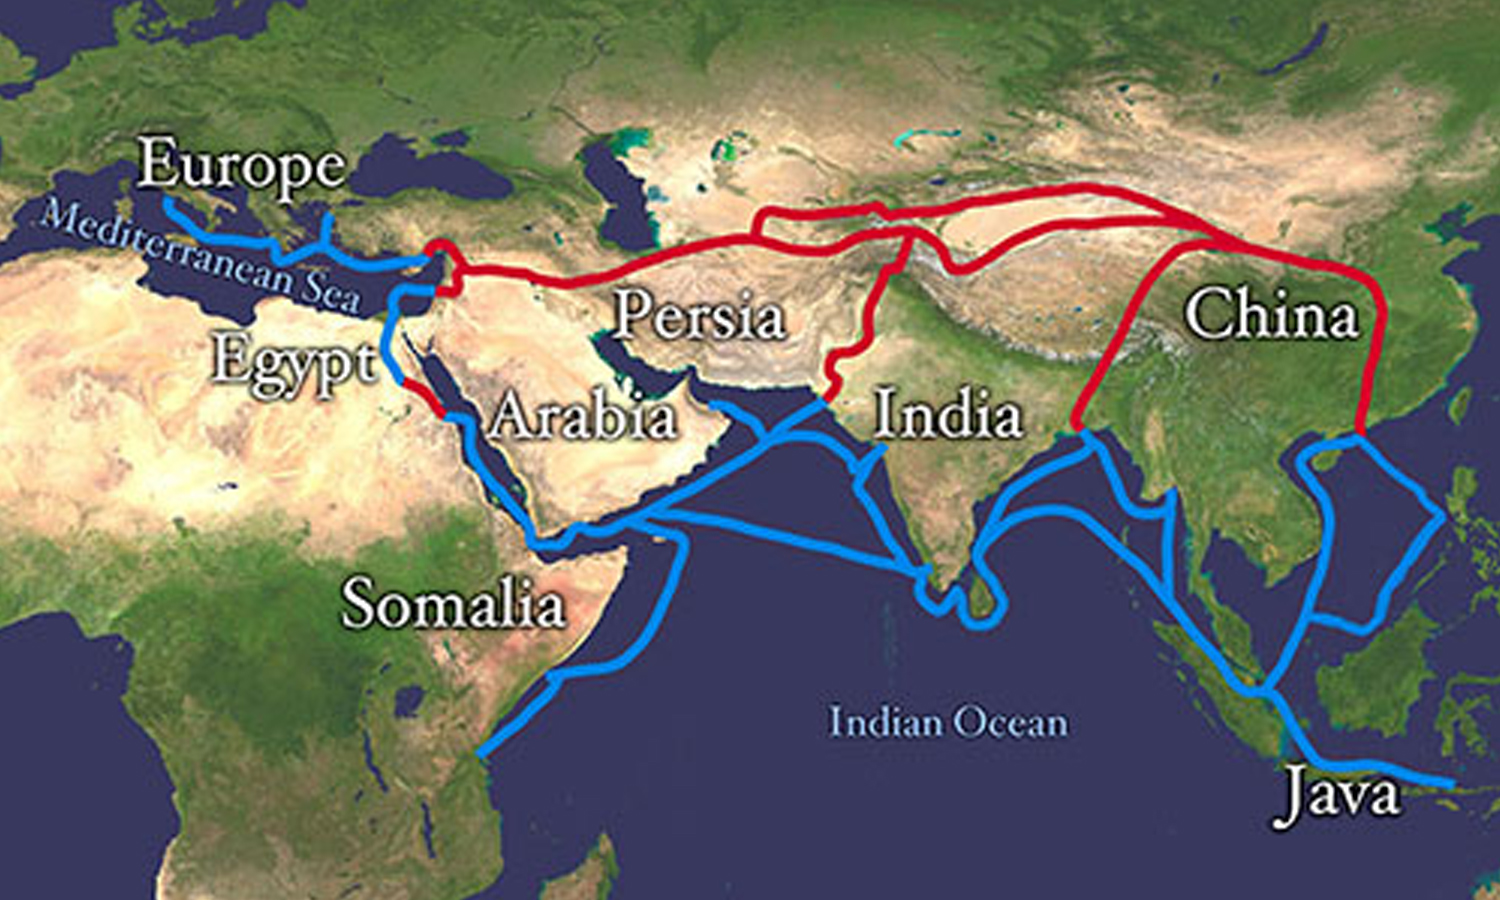 Revival of the Silk Road